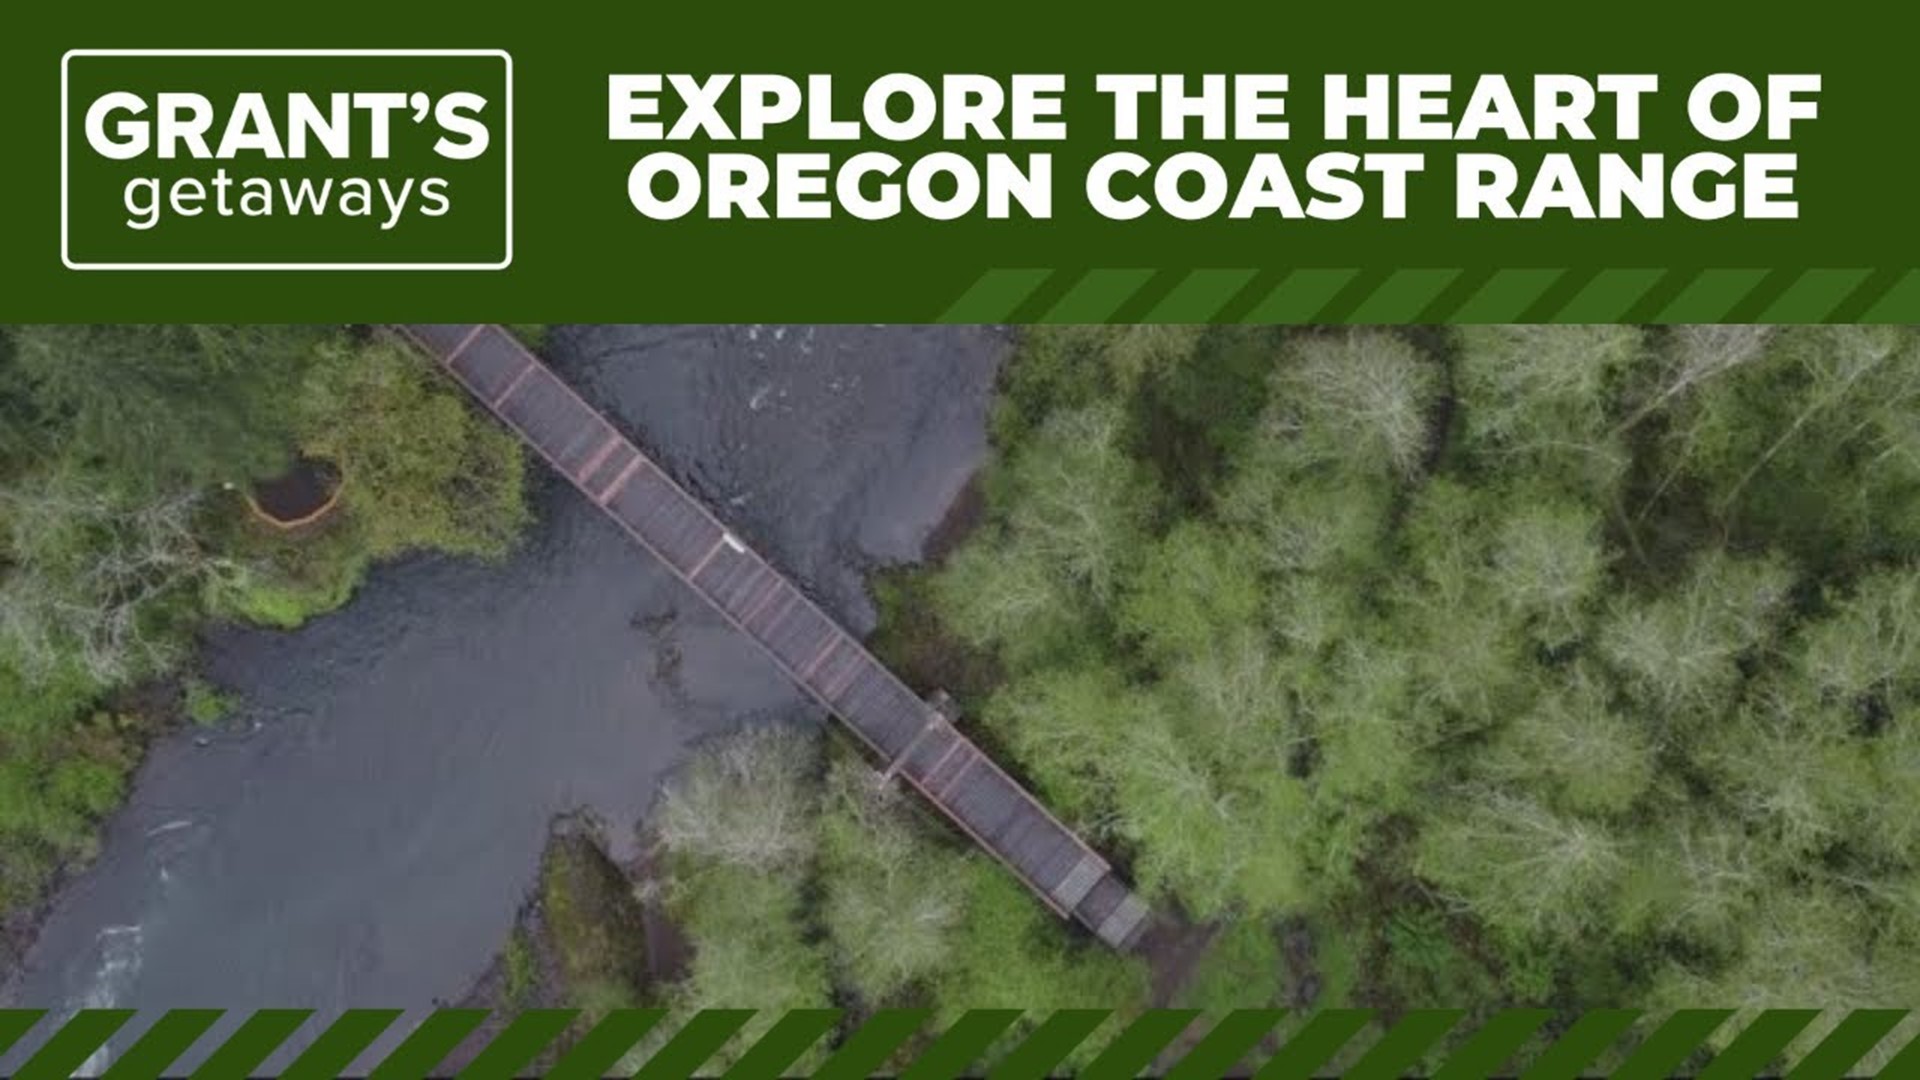 Established in 2018, it's the 29th state byway to preserve and enhance Oregon's most outstanding scenic corridors.